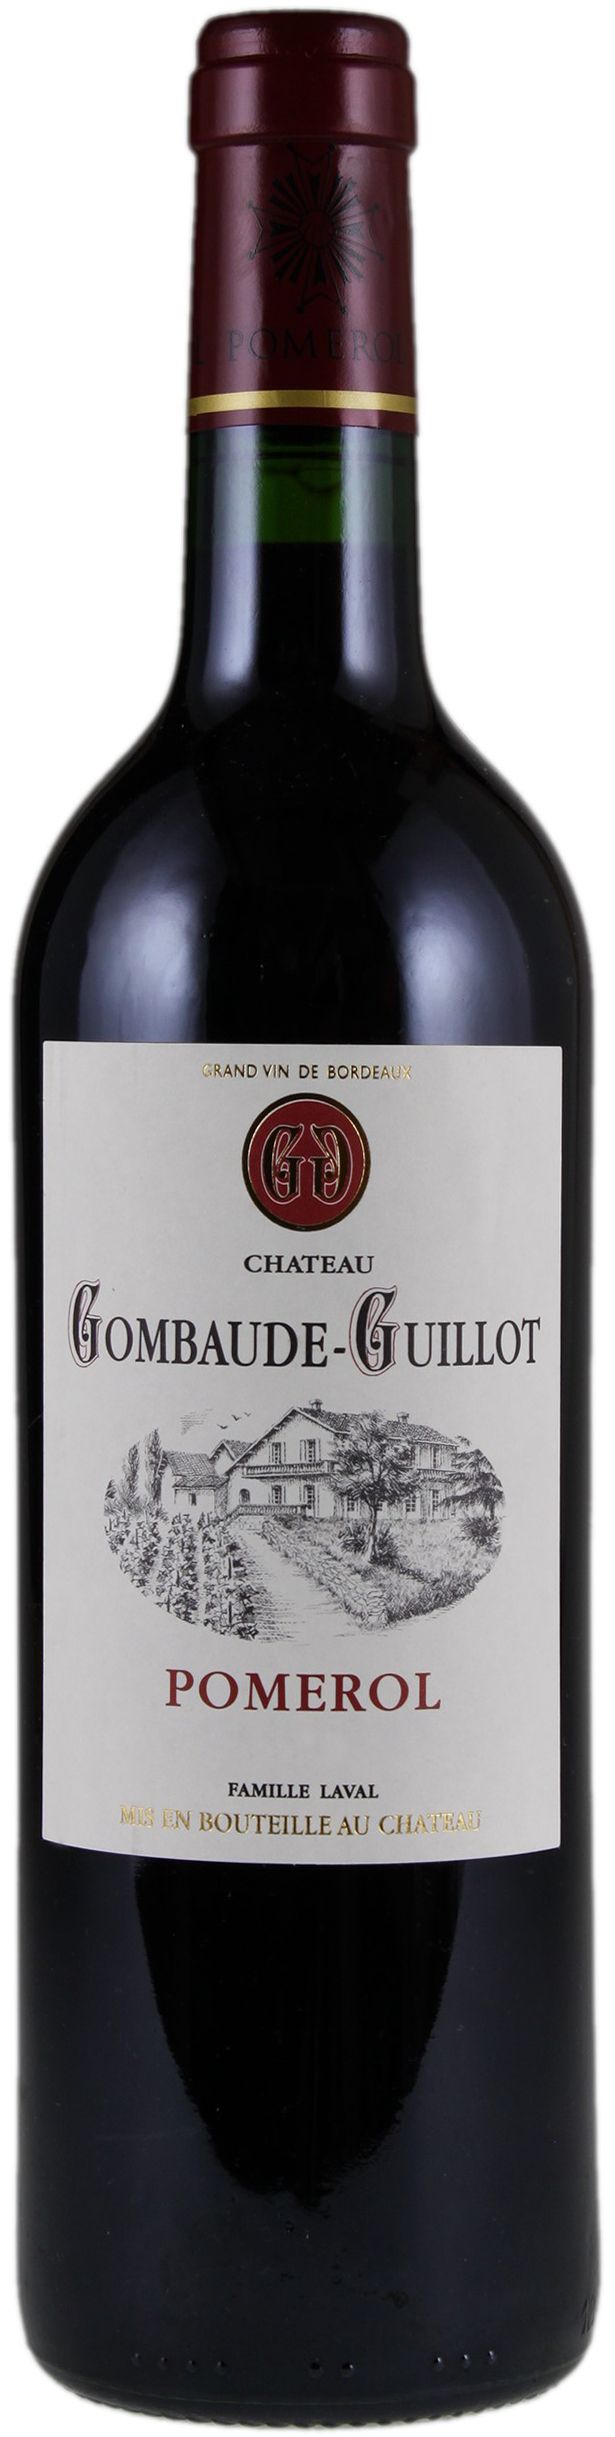 Chateau Gombaude Guillot, 2014